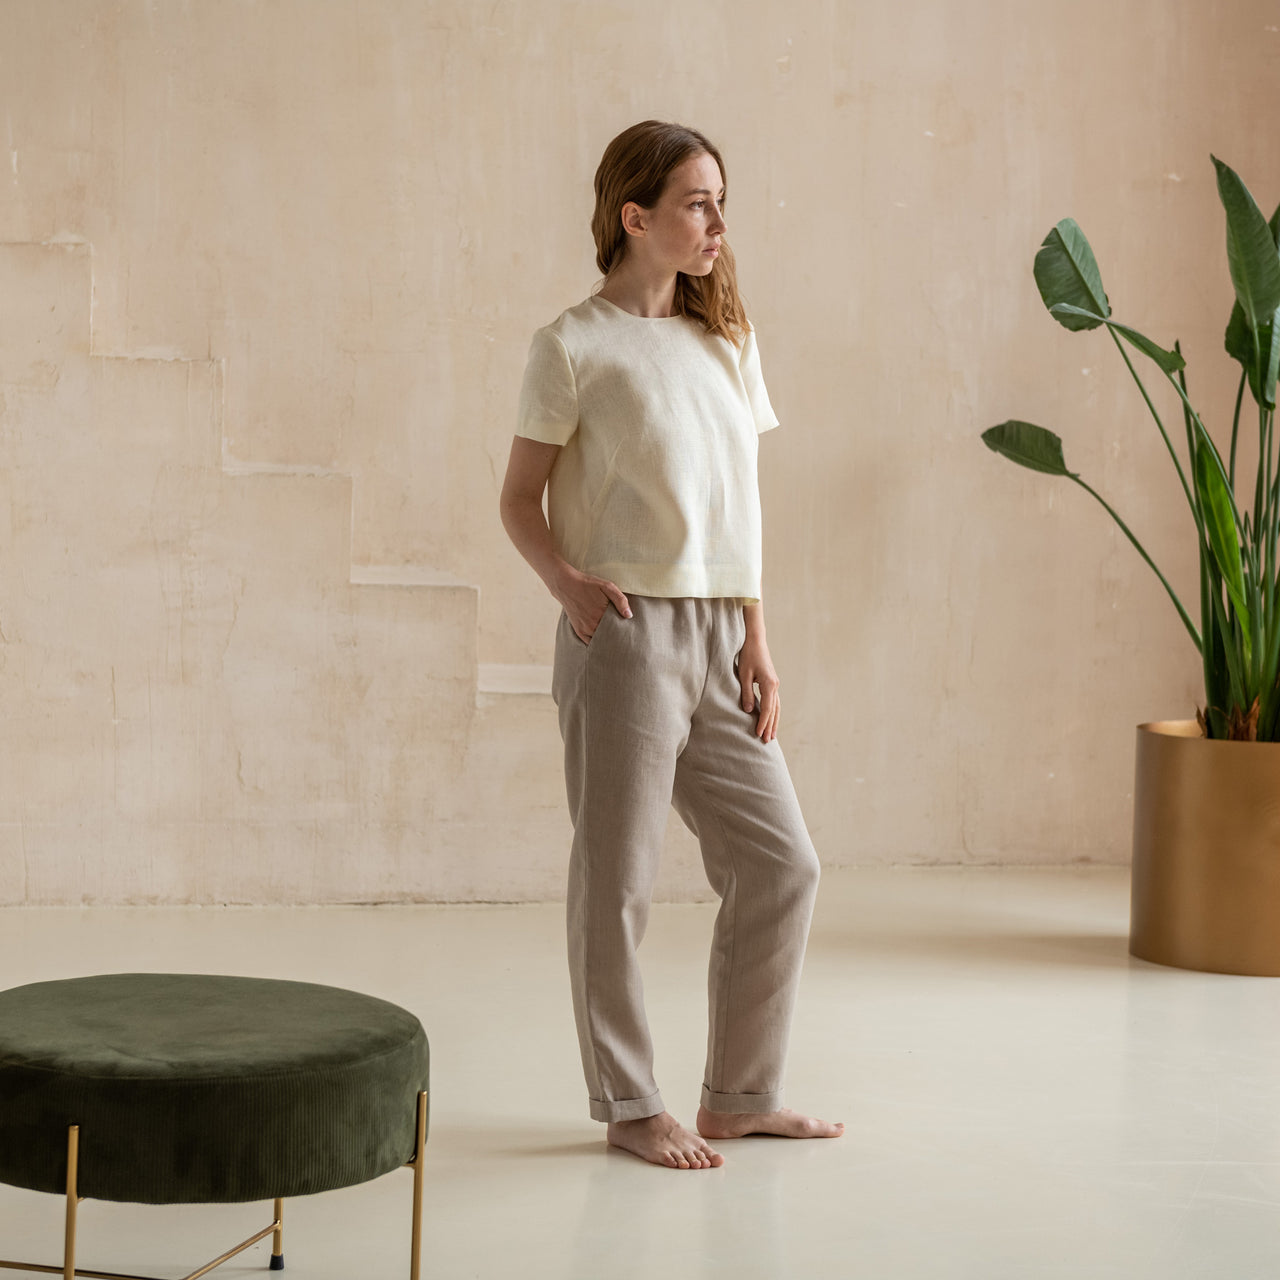 Linen Pants for Woman. Summer Pants. High Waisted Tapered Woman's Trousers  With Elastic Waistband and the Bow. Available in 47 Colors -  Canada